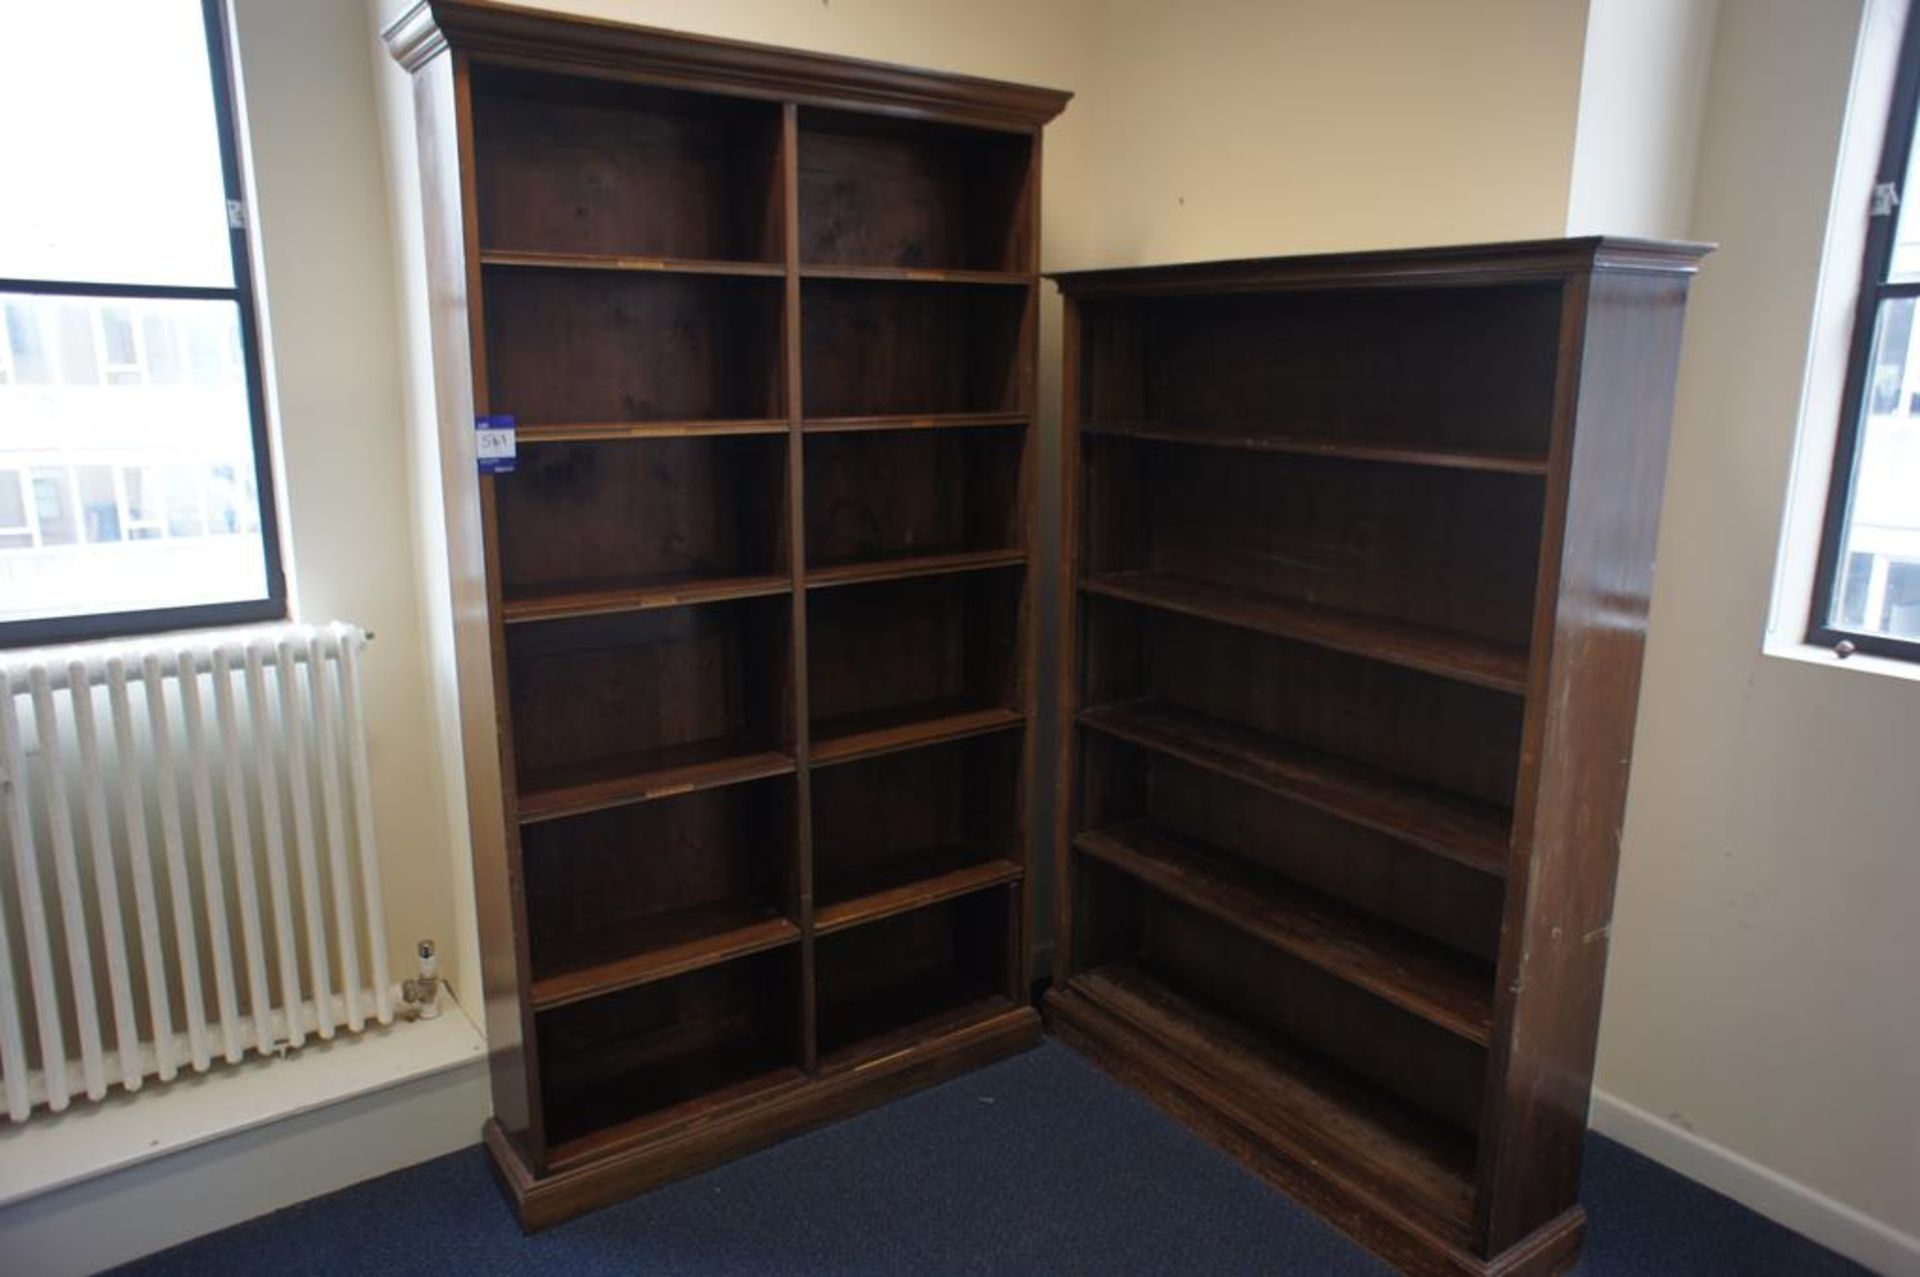 * 2 Mahogany Multi Compartment Storage Units Photographs are provided for example purposes only